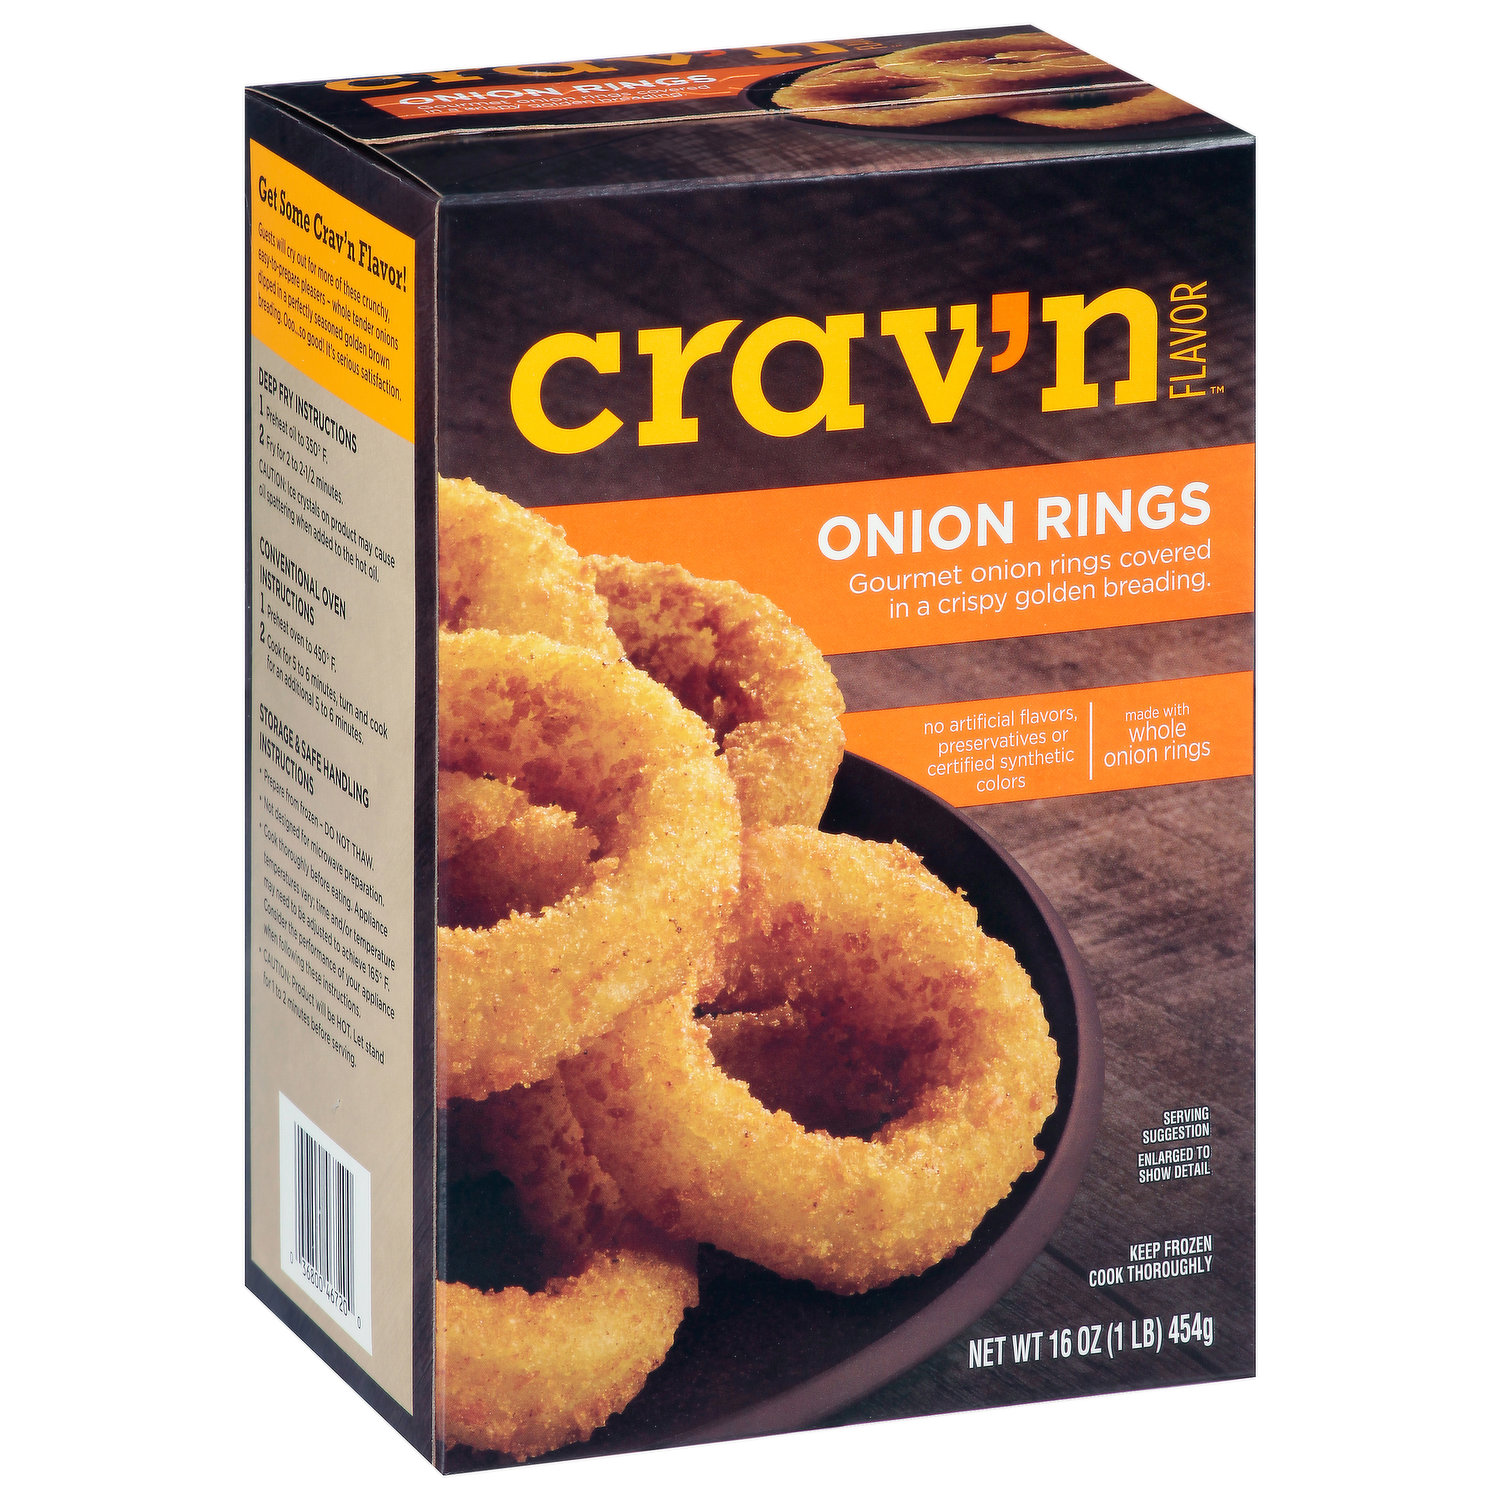 Onion Rings in the Ninja Frying System (and a Giveaway!)